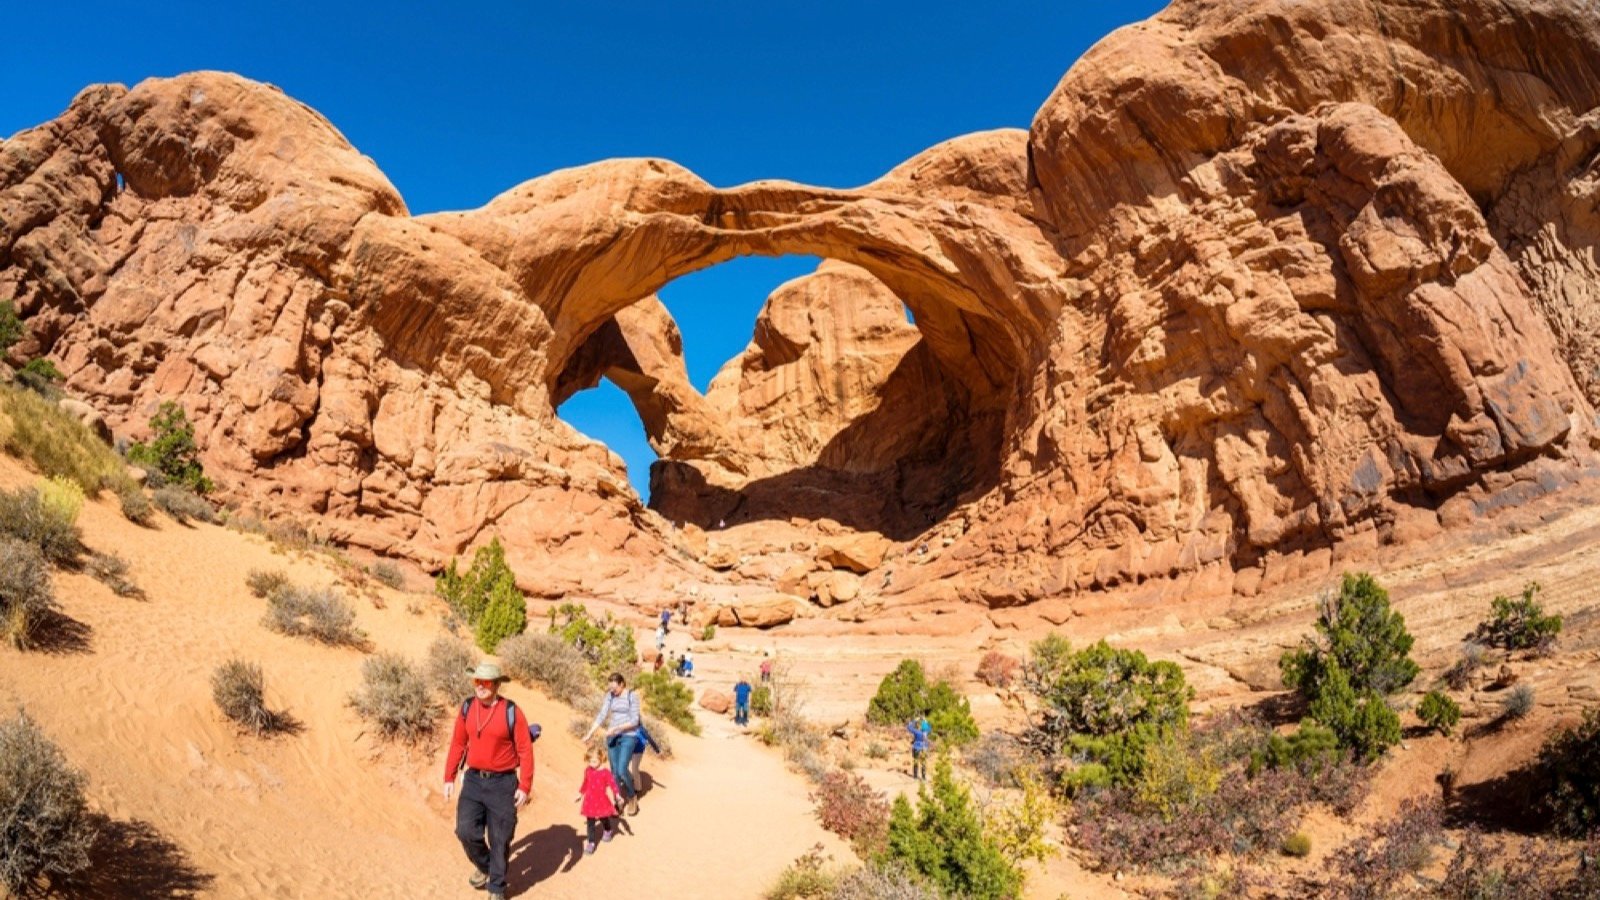 <p>You don’t have to travel too far from Canyonland to find another beautiful park in Utah. Arches National Park has over 2,000 sandstone arches, including the iconic Delicate Arch, which graces Utah’s automobile license plates.</p><p>In addition to the famous arches, the park is also home to Balanced Rock, which rises 128 feet into the sky. This gravity-defying feature demonstrates the natural action of erosion and its effect on the Earth’s landscape.</p>